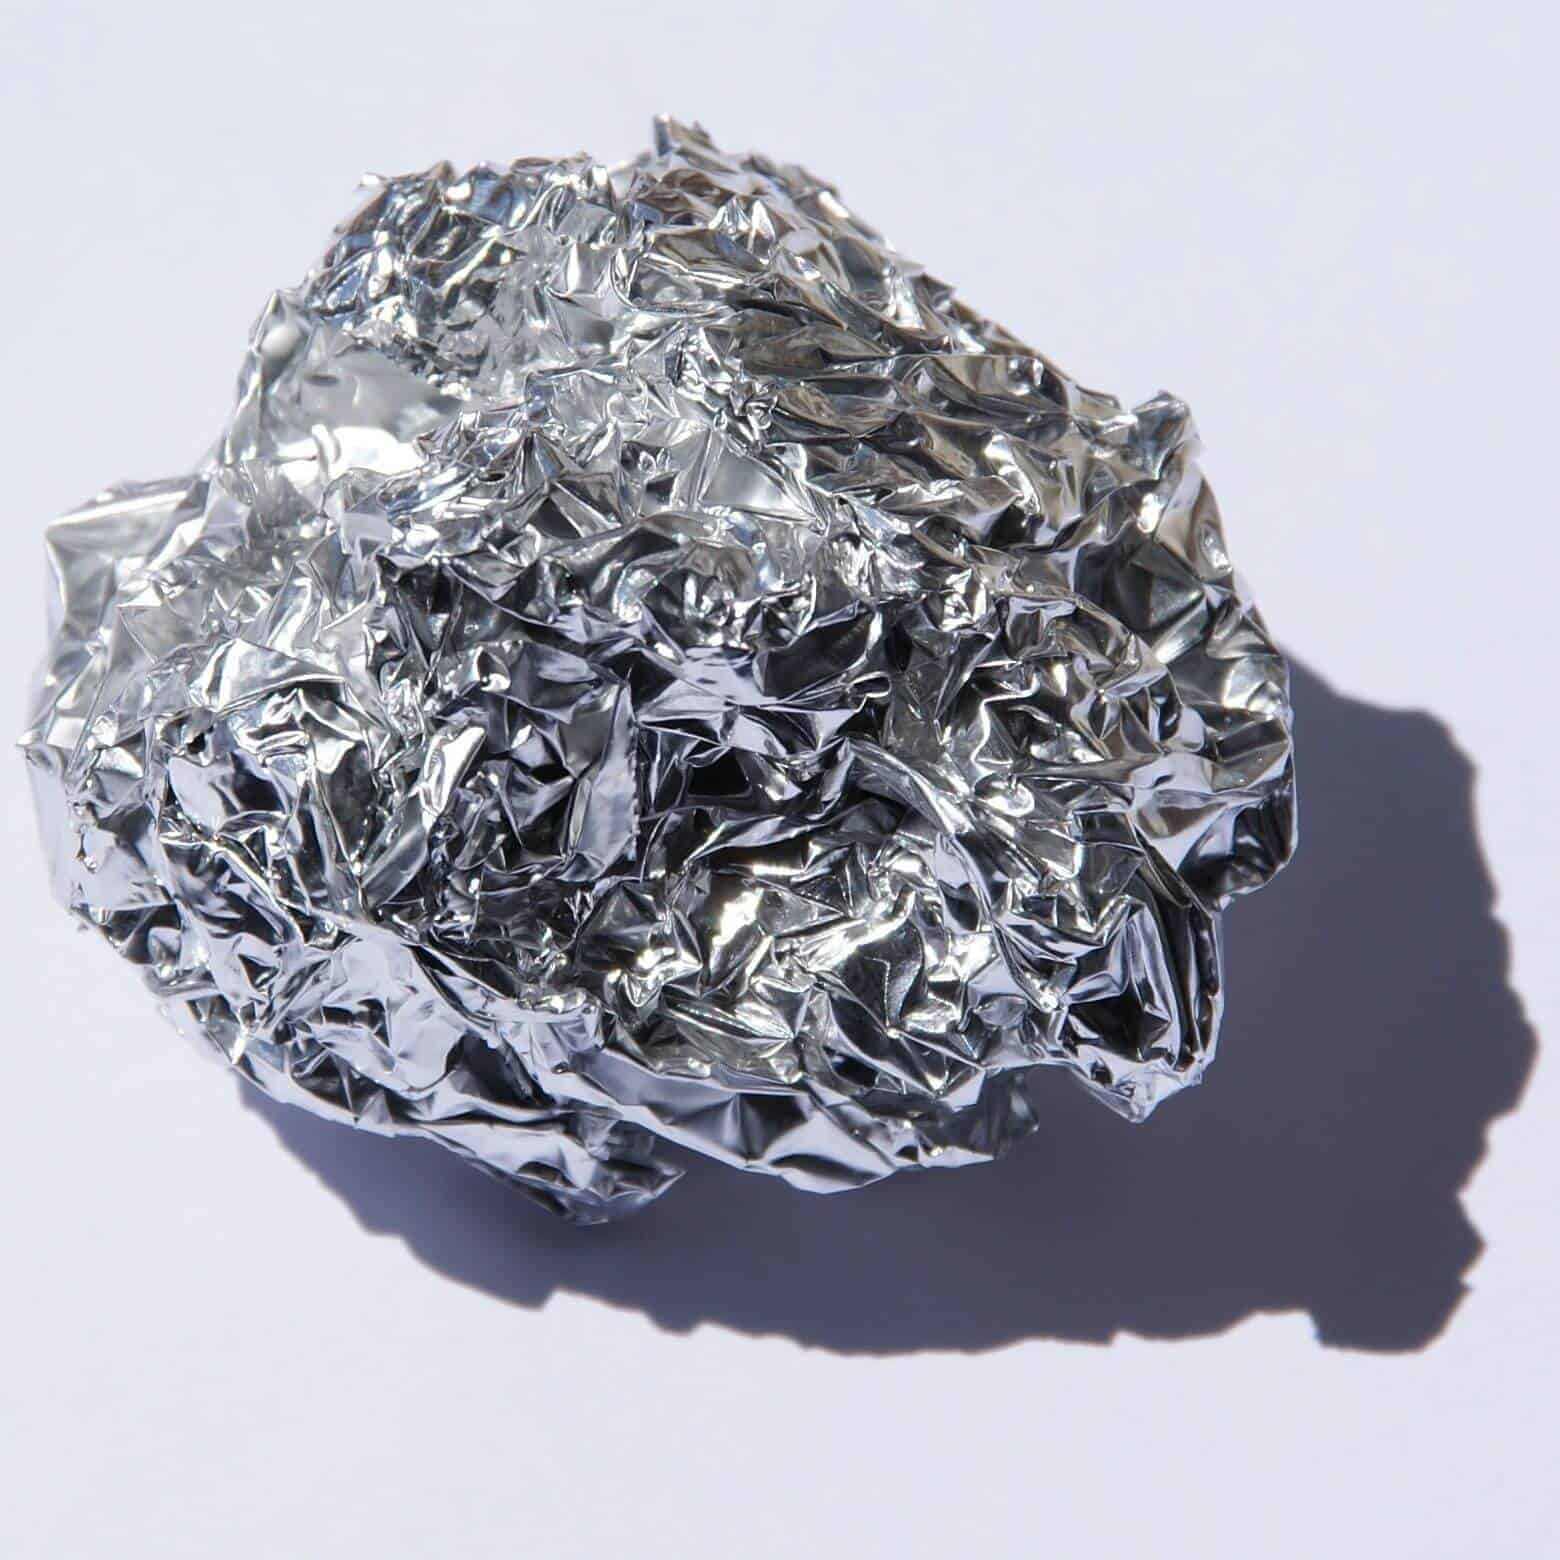 You are currently viewing Aluminium